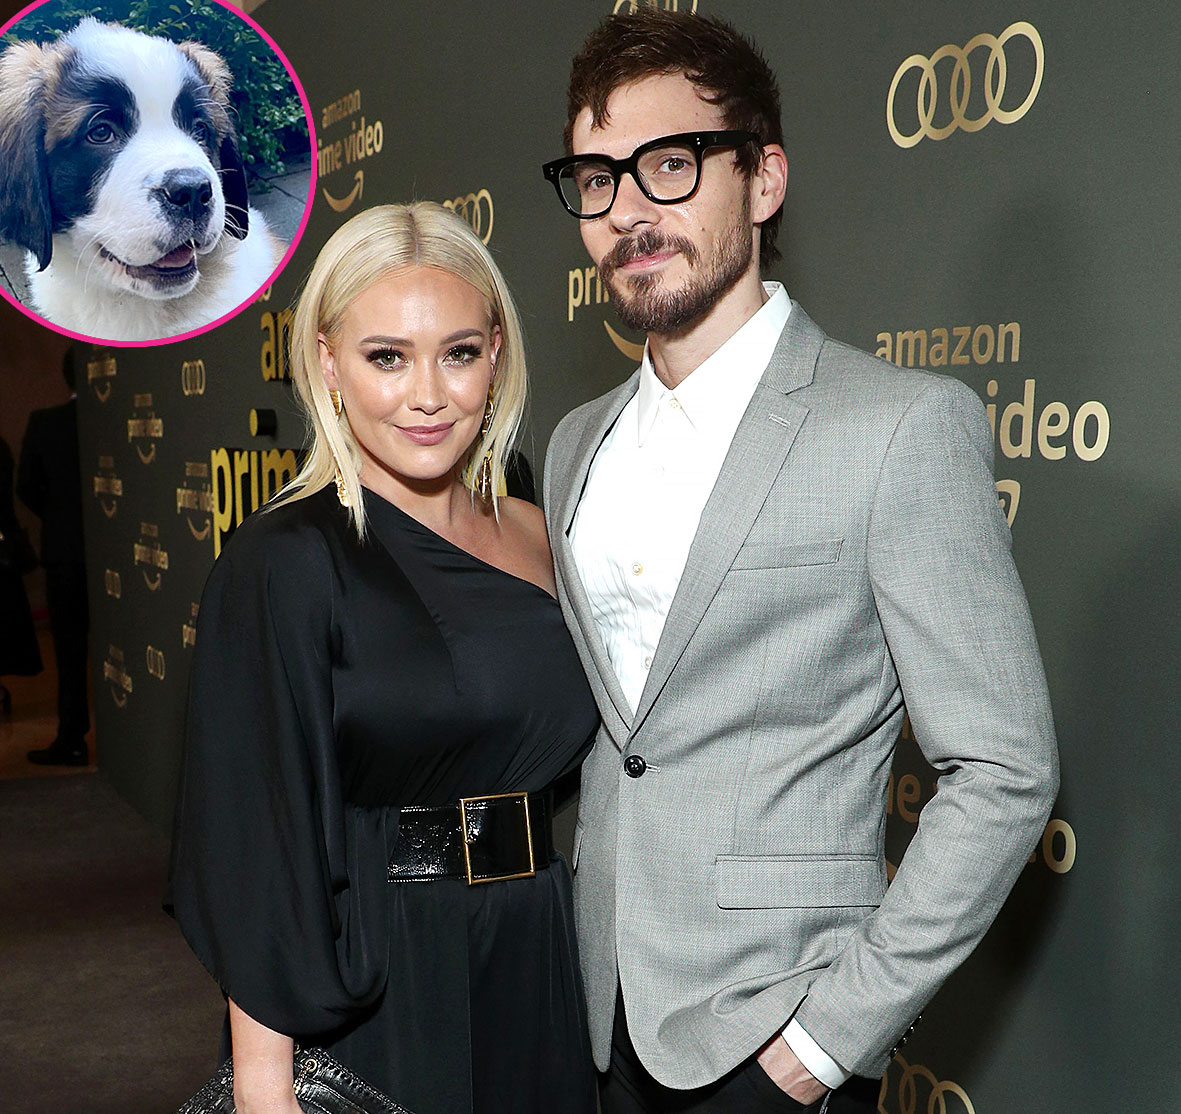 https://www.usmagazine.com/wp-content/uploads/2020/11/Stars-Whove-Adopted-New-Dogs-Their-Family-Amid-Pandemic-Hilary-Duff.jpg?quality=55&strip=all